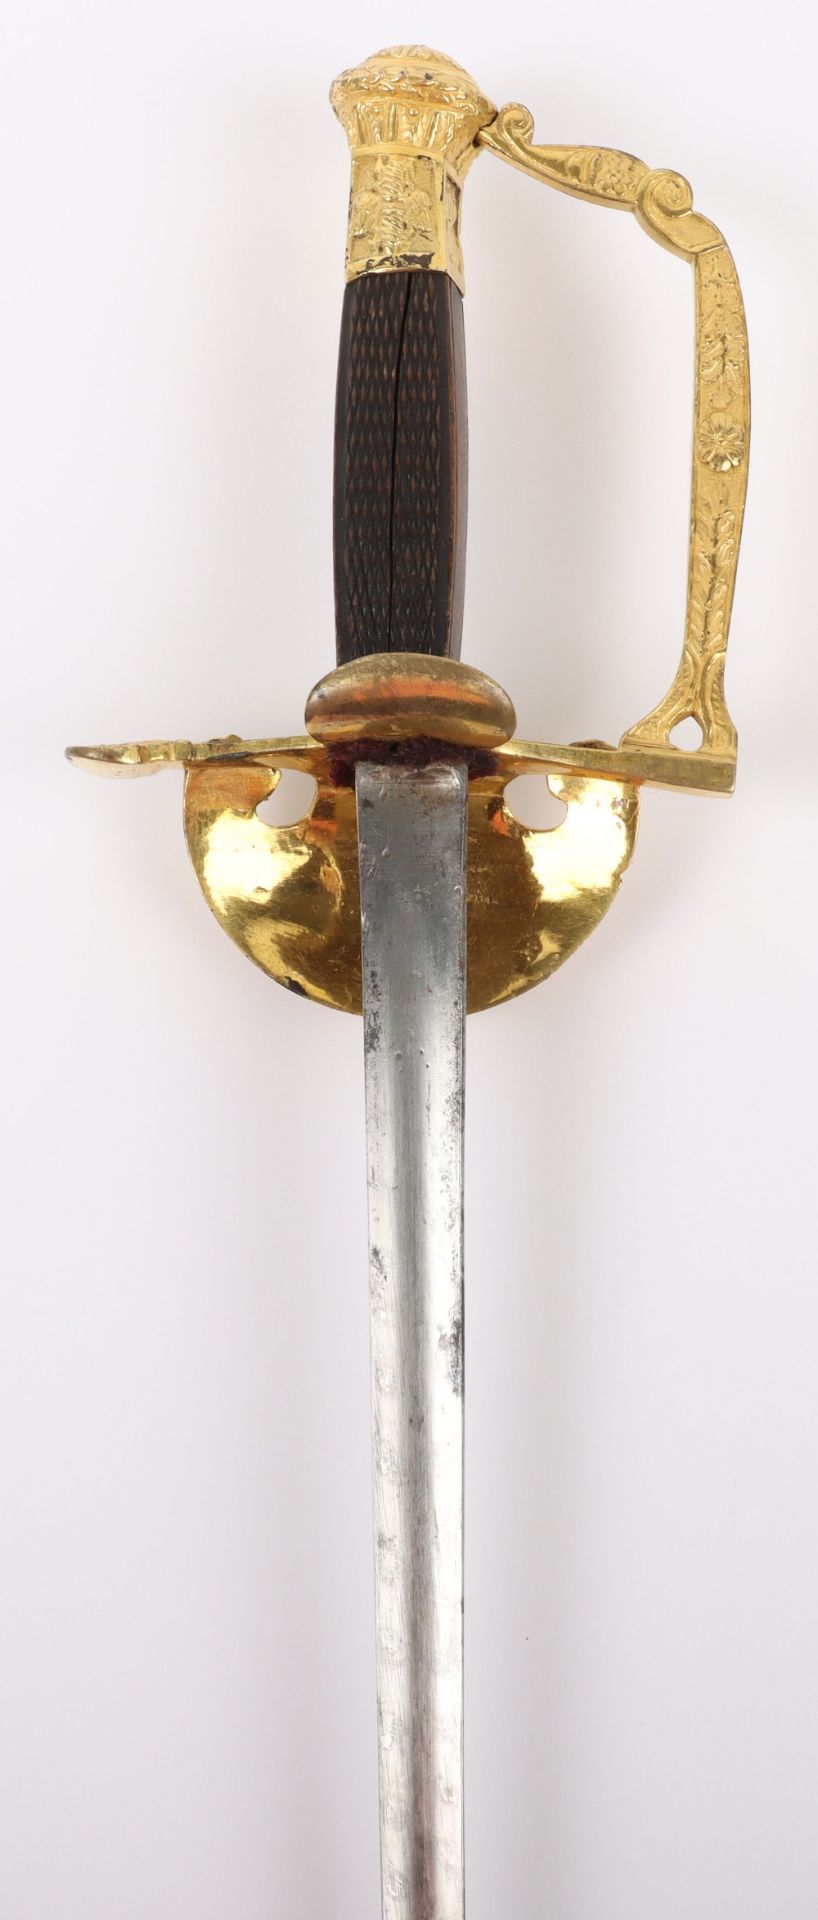 19th Century French Dress Sword - Image 2 of 11